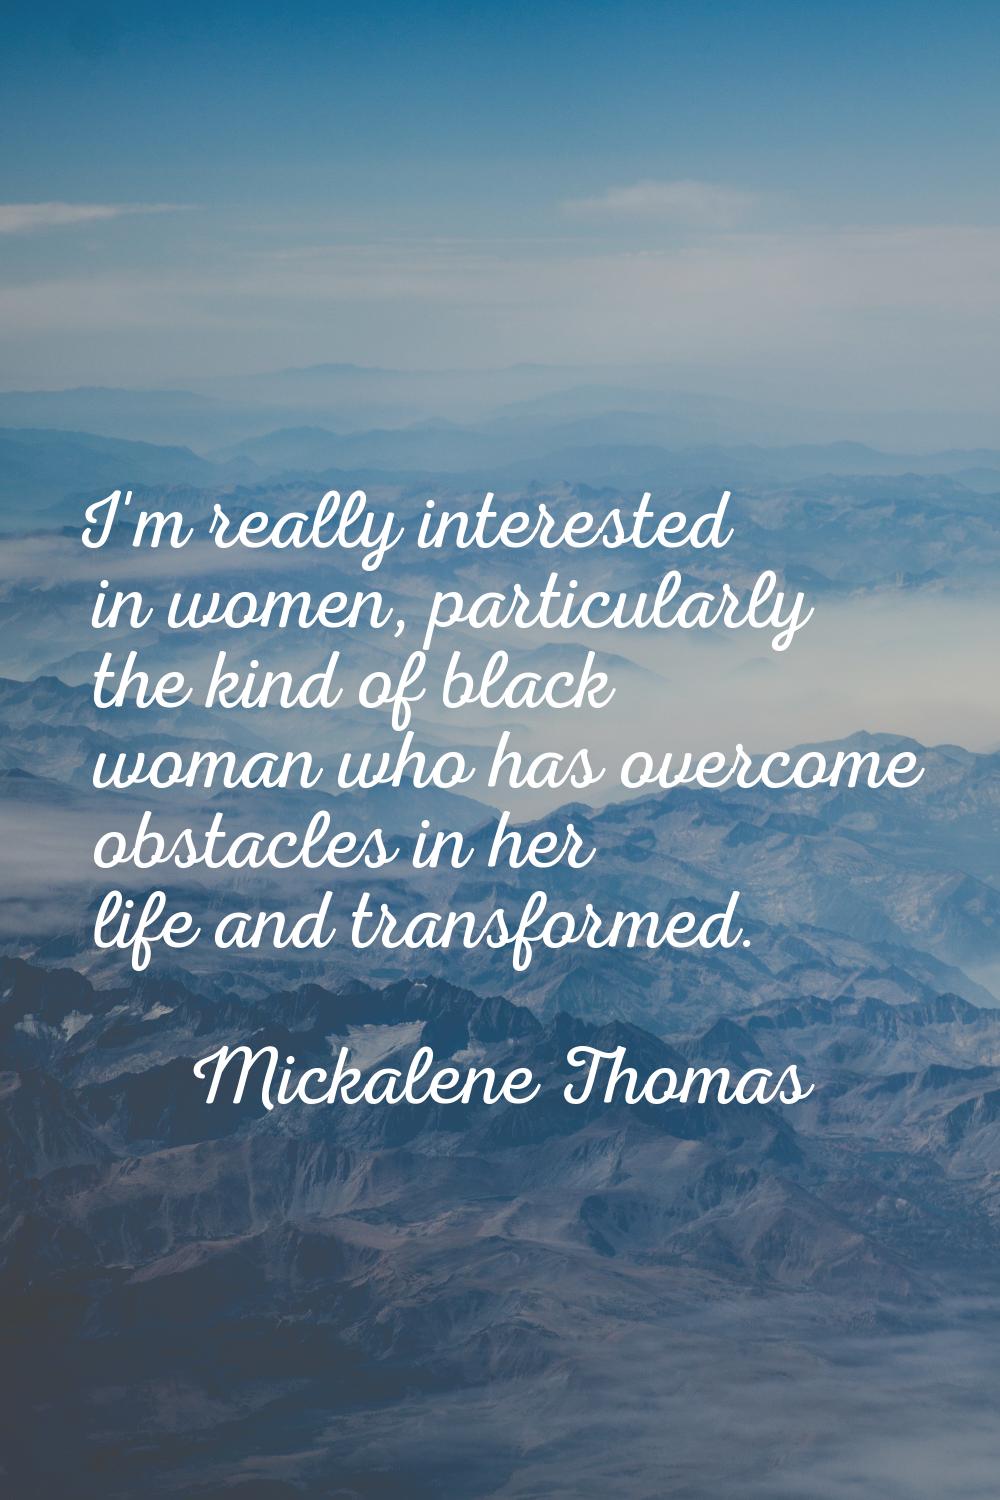 I'm really interested in women, particularly the kind of black woman who has overcome obstacles in 